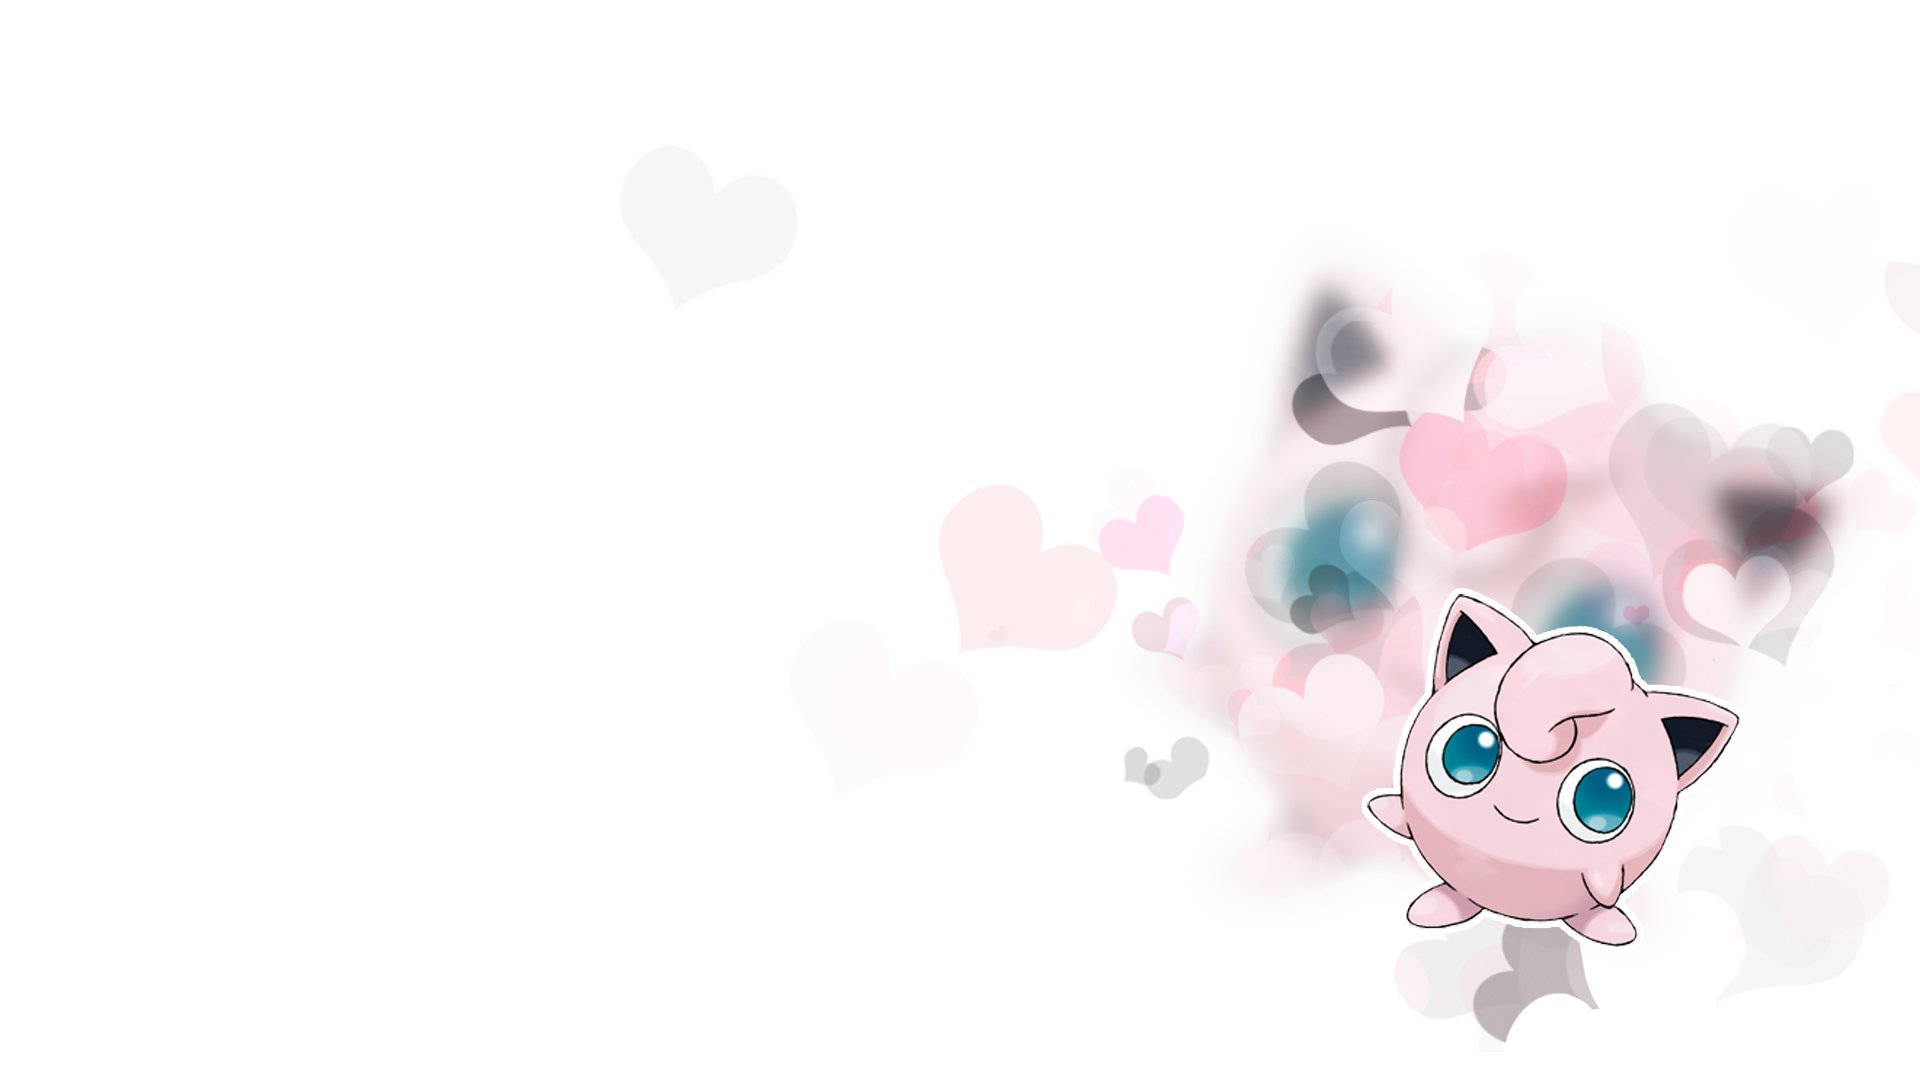 The Loveable Jigglypuff